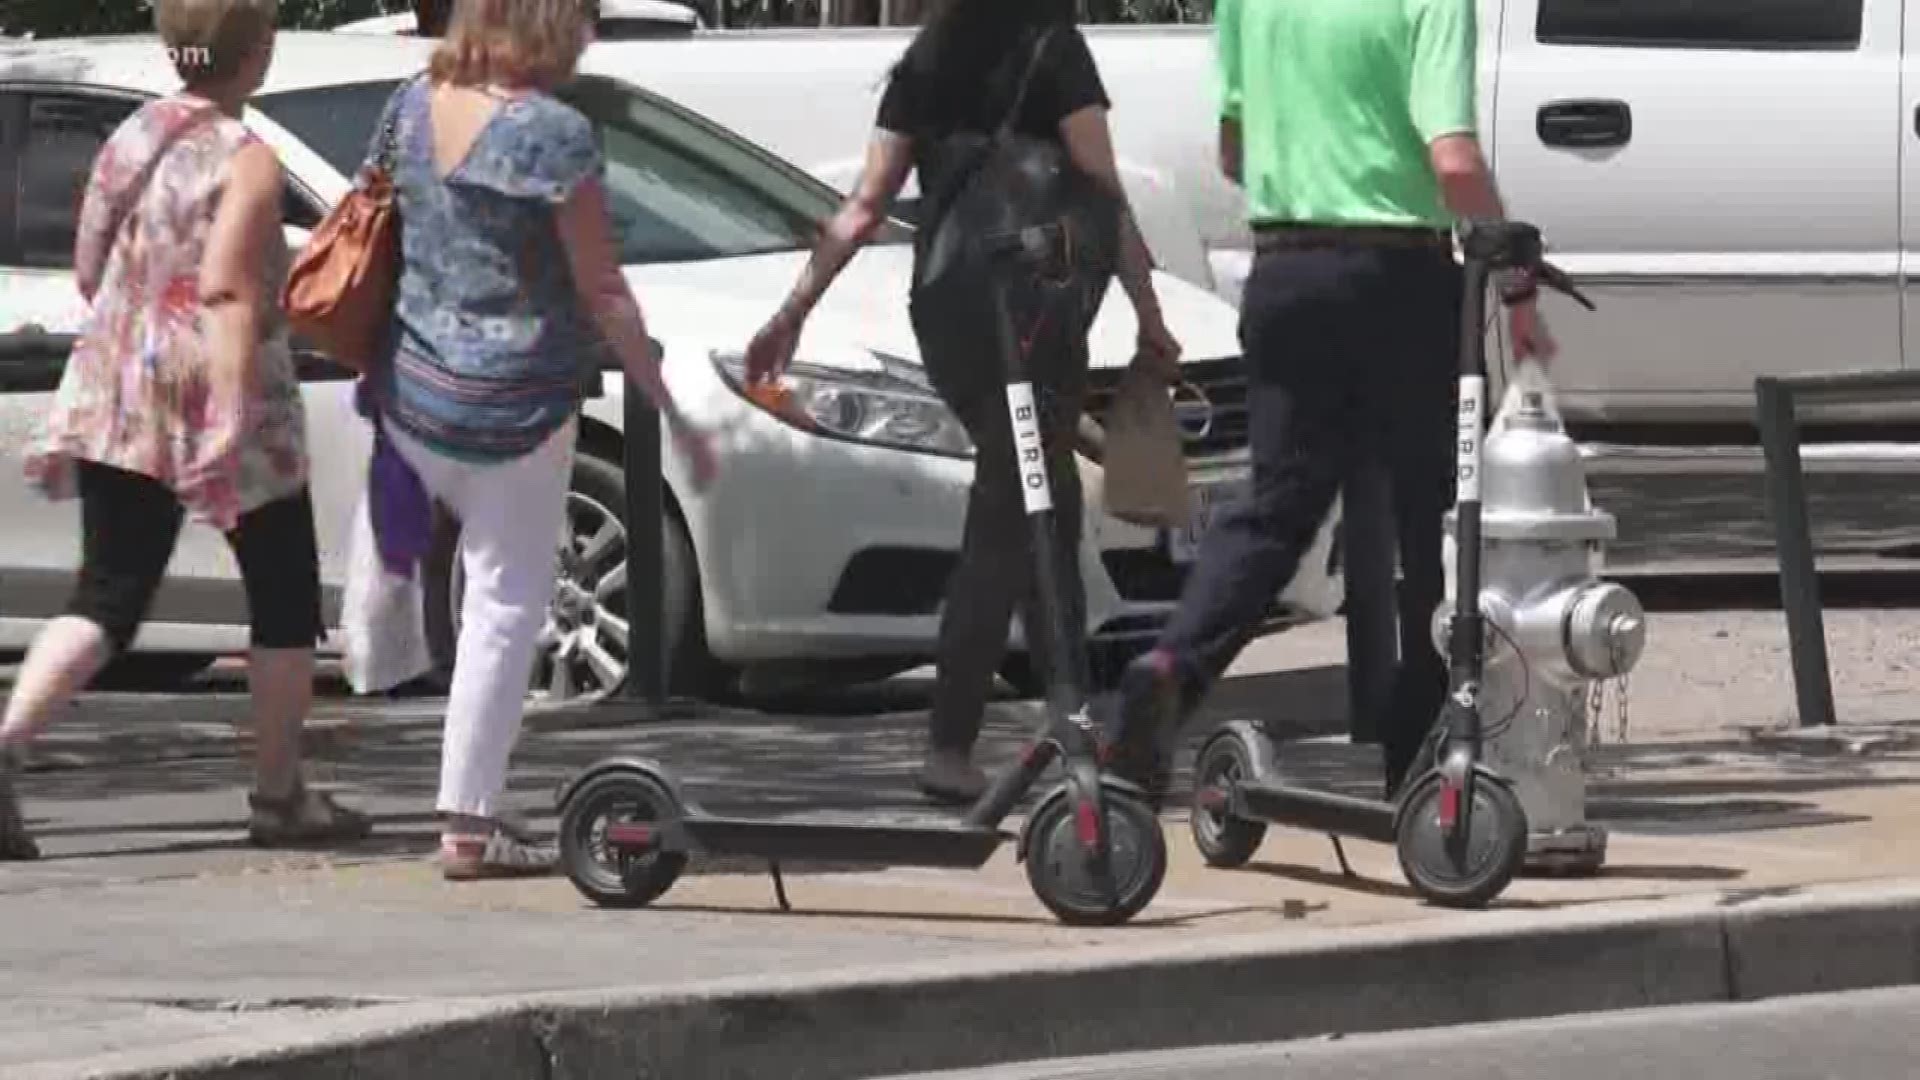 Hundreds of scooters already roll down San Antonio sidewalks and streets. Now the city's about to roll out rules on how to use them. Eyewitness News reporter Erica Zucco has more.